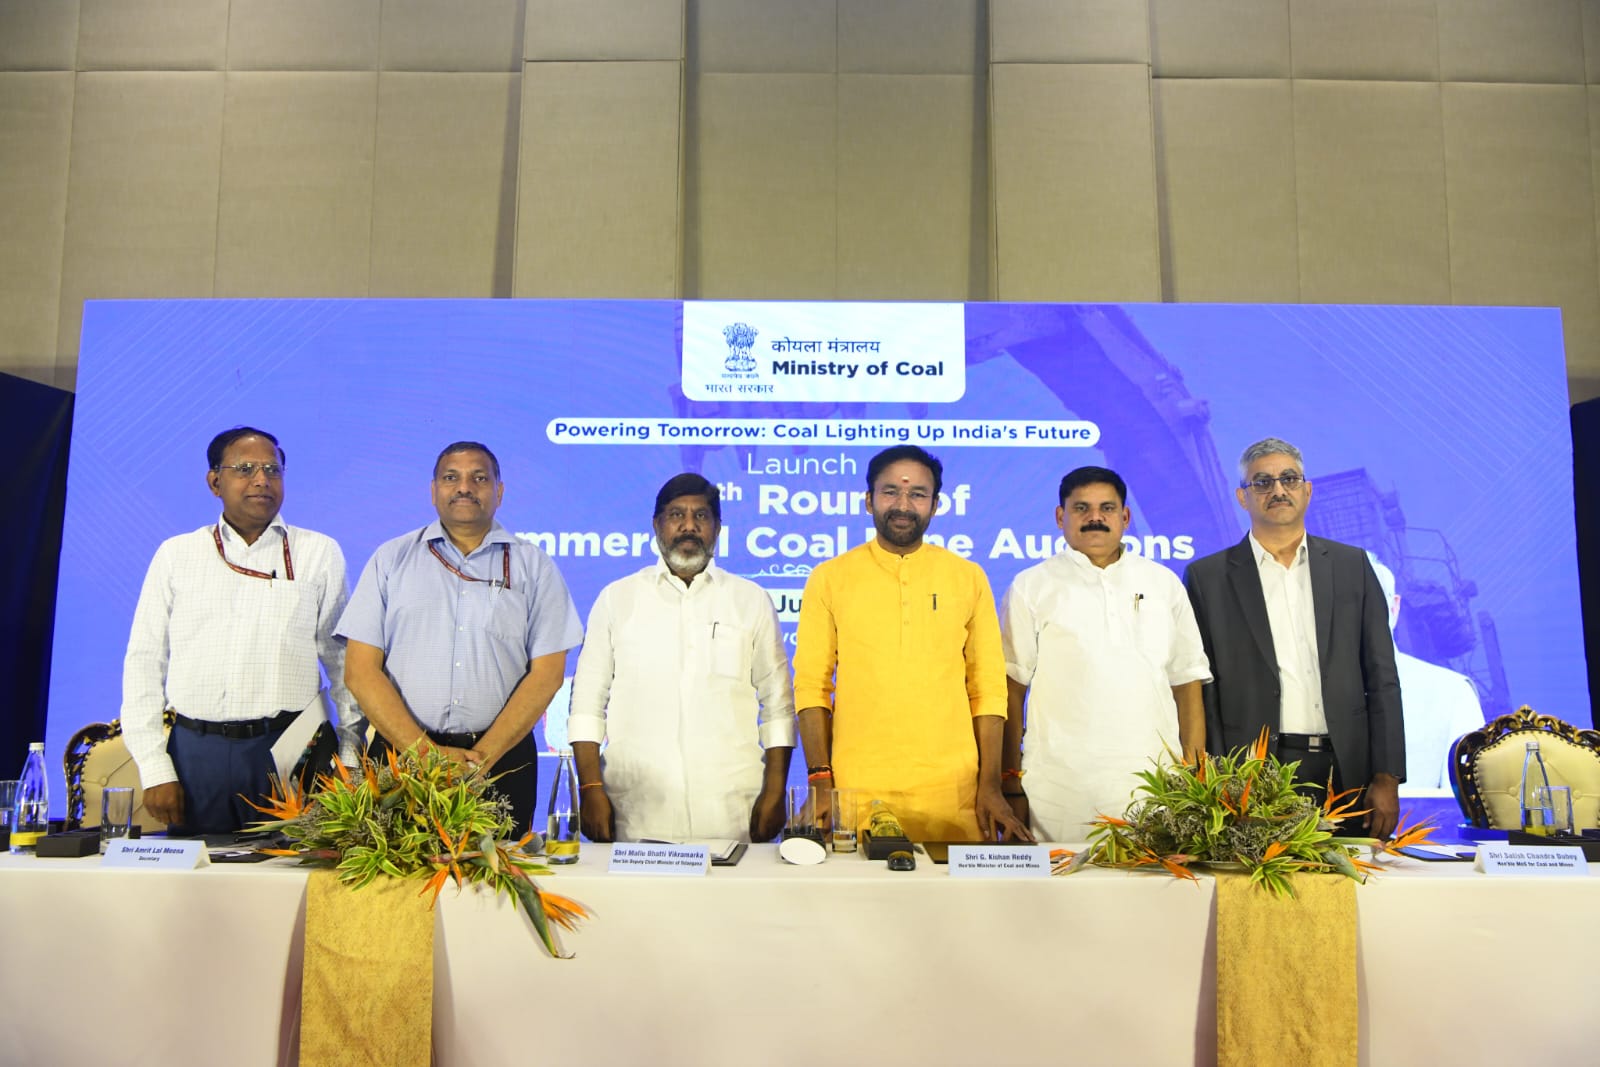 Union Minister Sh. G Kishan Reddy Ji launches 10th tranche of commercial Coal Mine Auctions